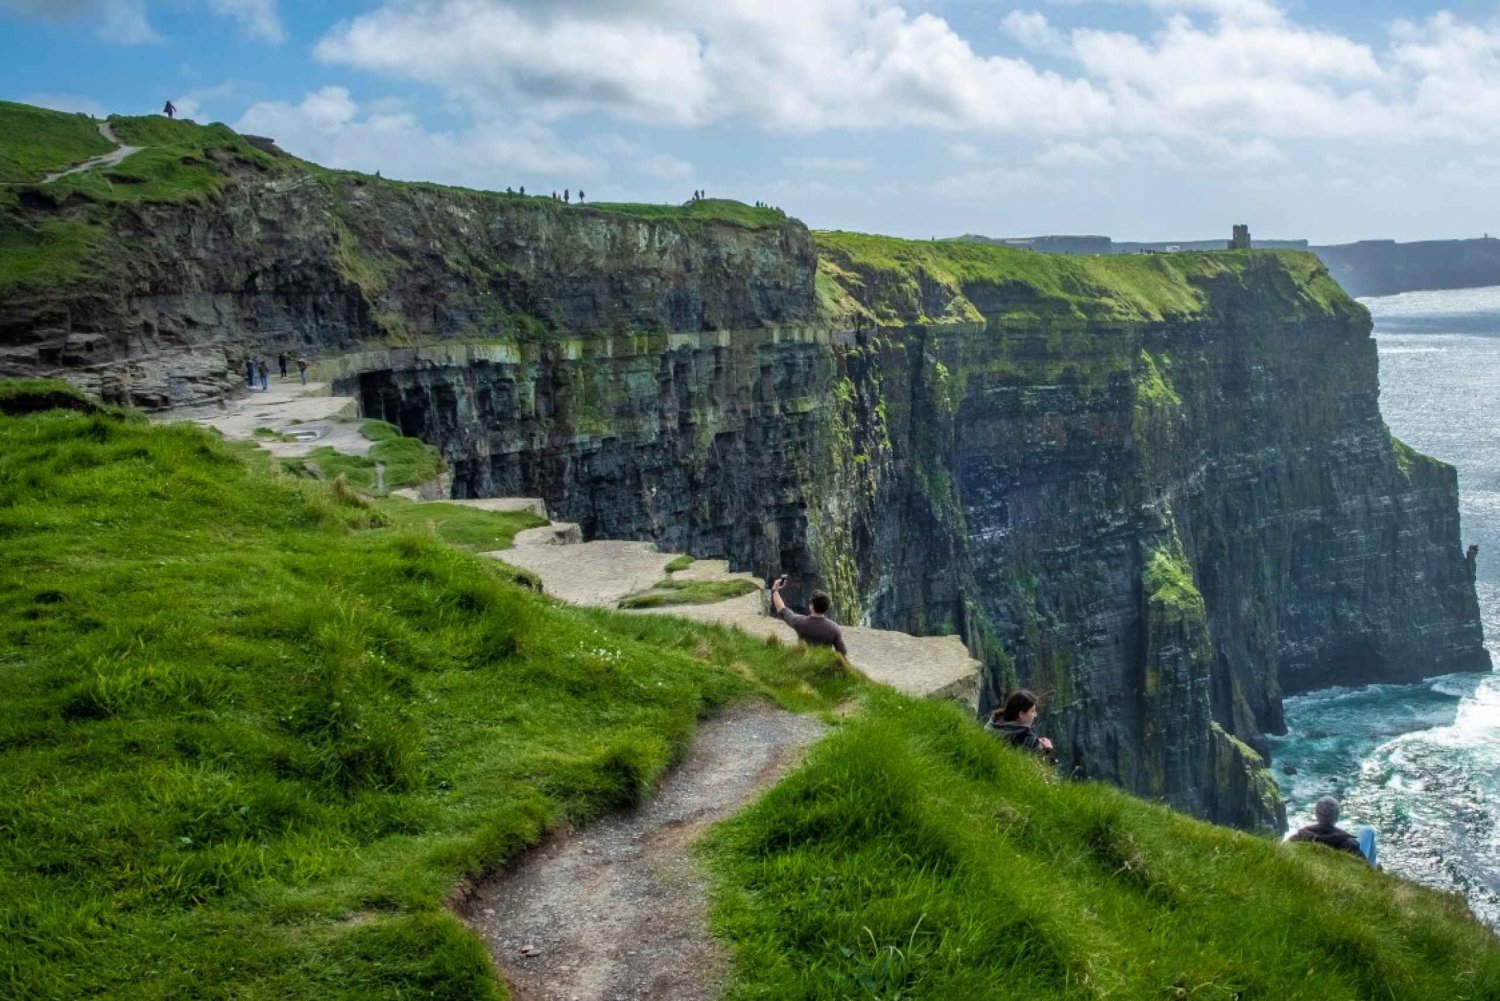 From Dublin: Guided Day Trip to Cliffs of Moher and Galway